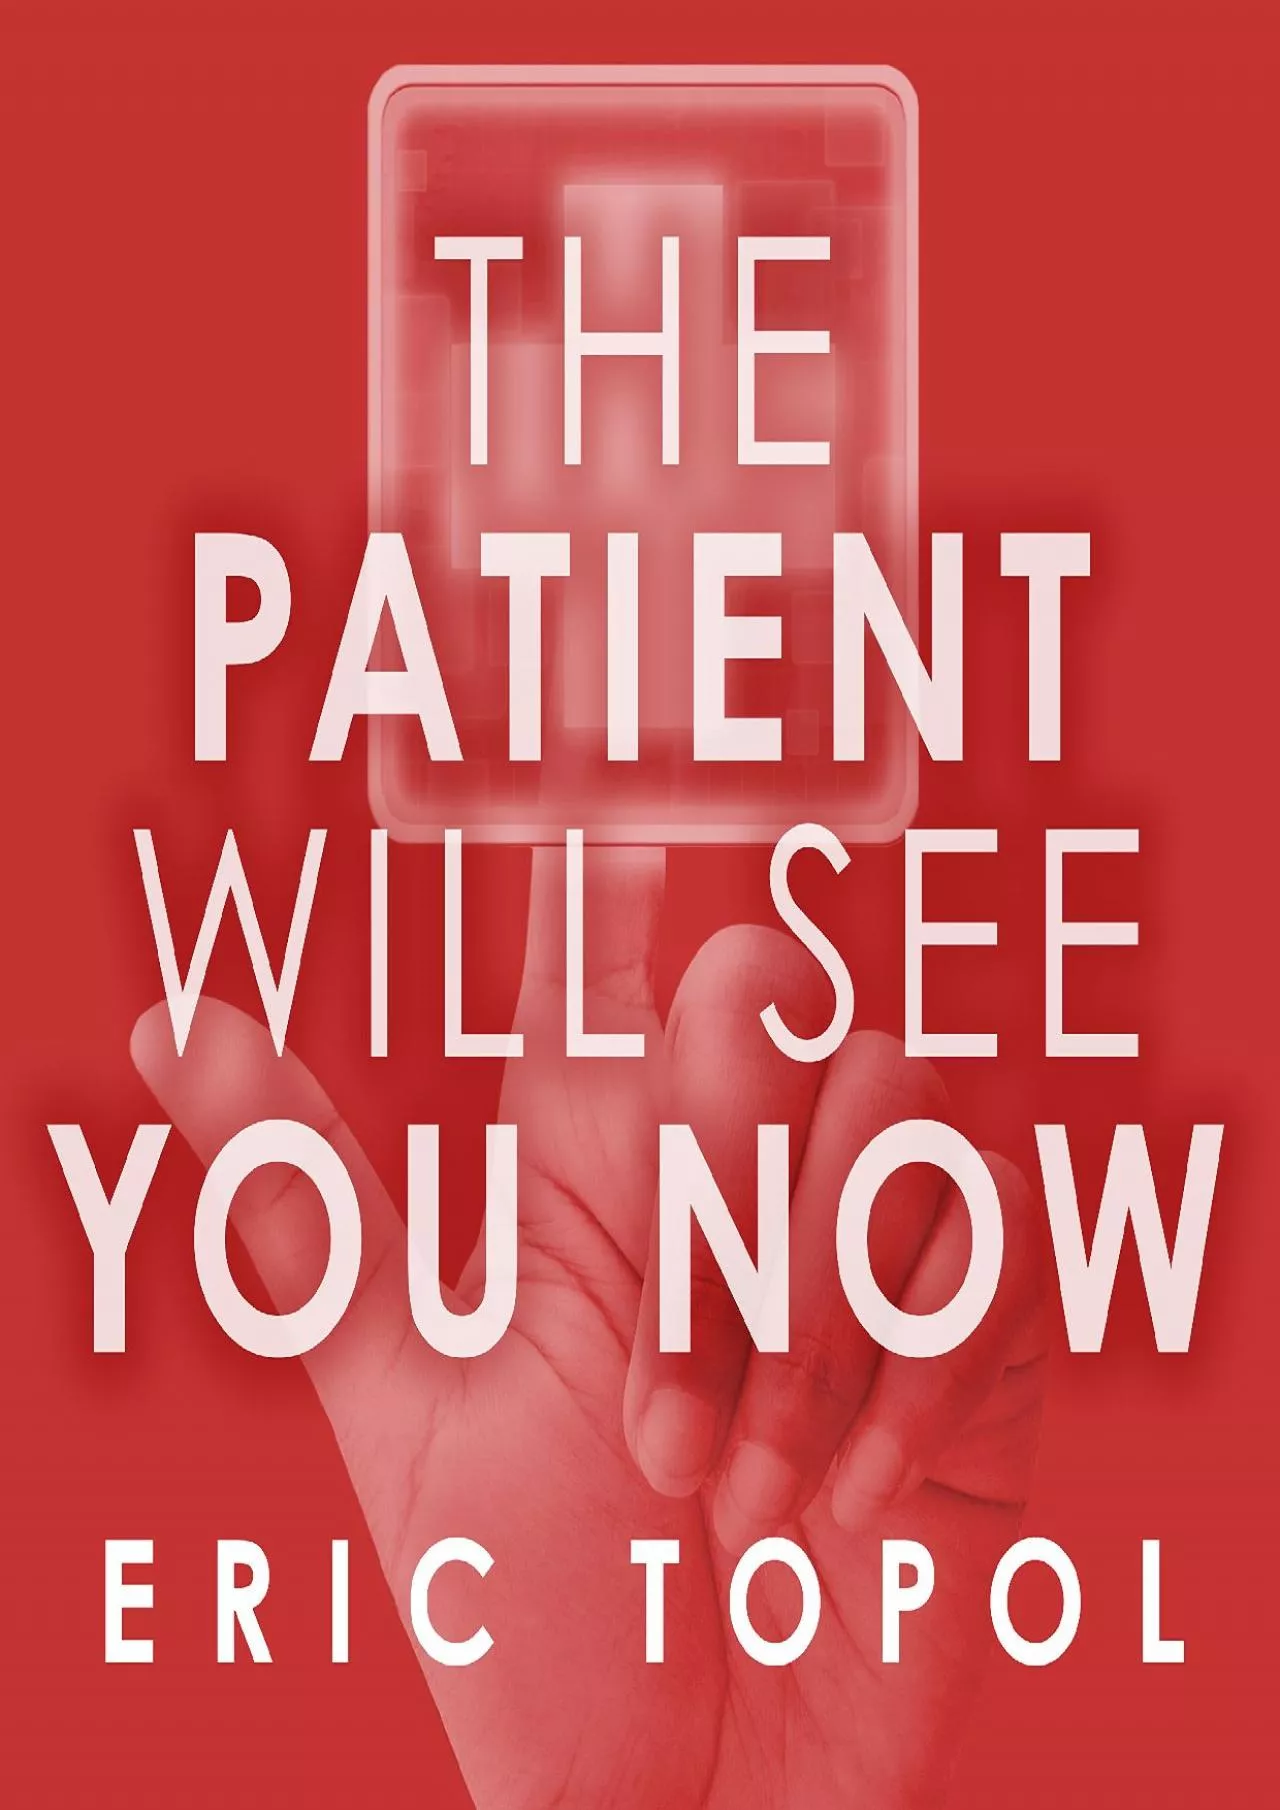 (BOOK)-The Patient Will See You Now: The Future of Medicine Is in Your Hands